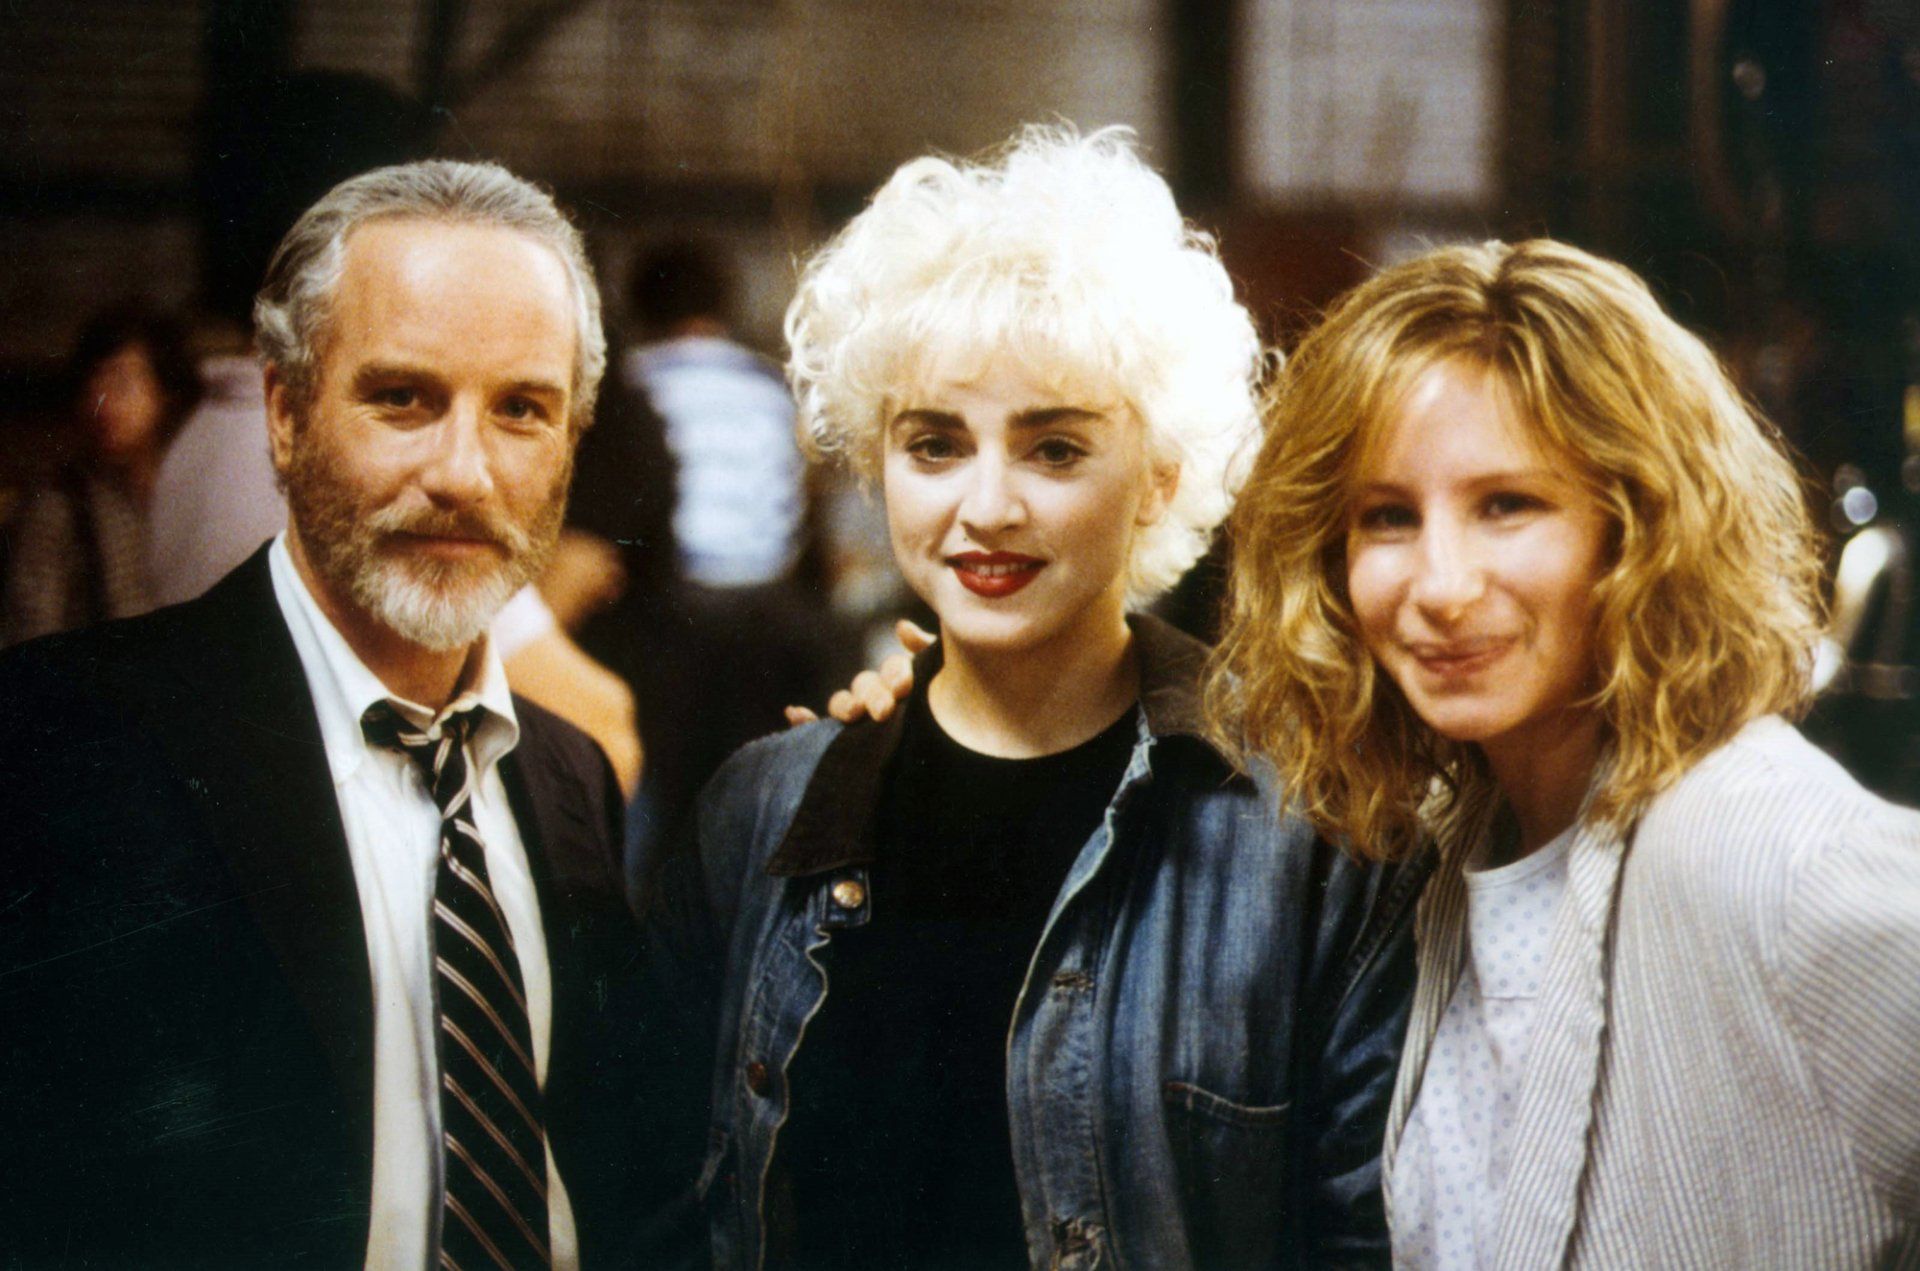 Madonna, filming her movie WHO'S THAT GIRL for Warner Brothers, visits the set of NUTS.